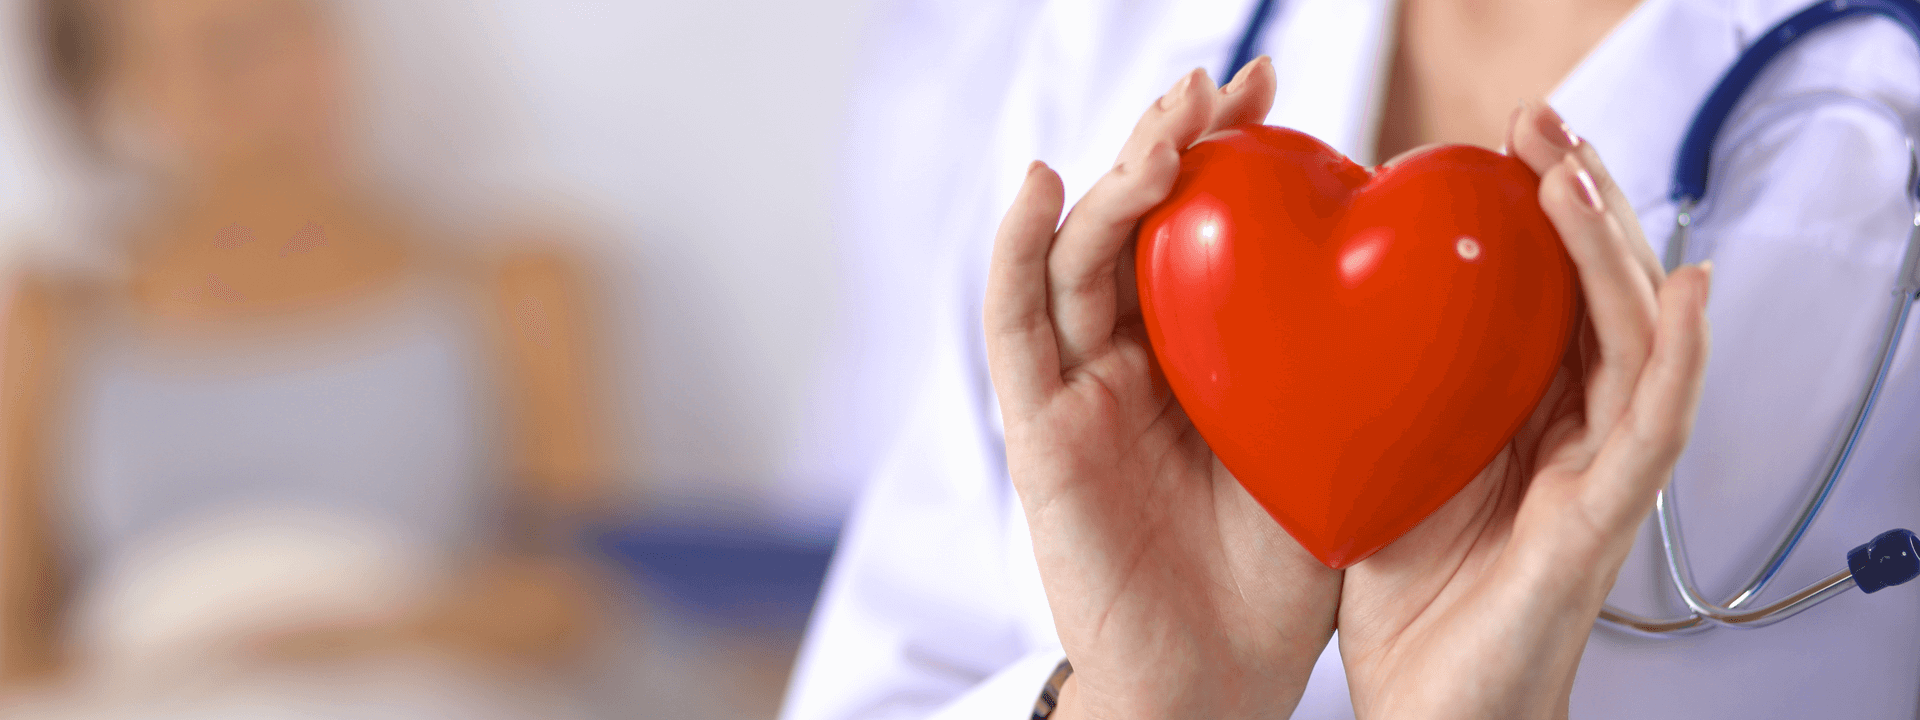 Heart Disease... Do you REALLY want to avoid it?